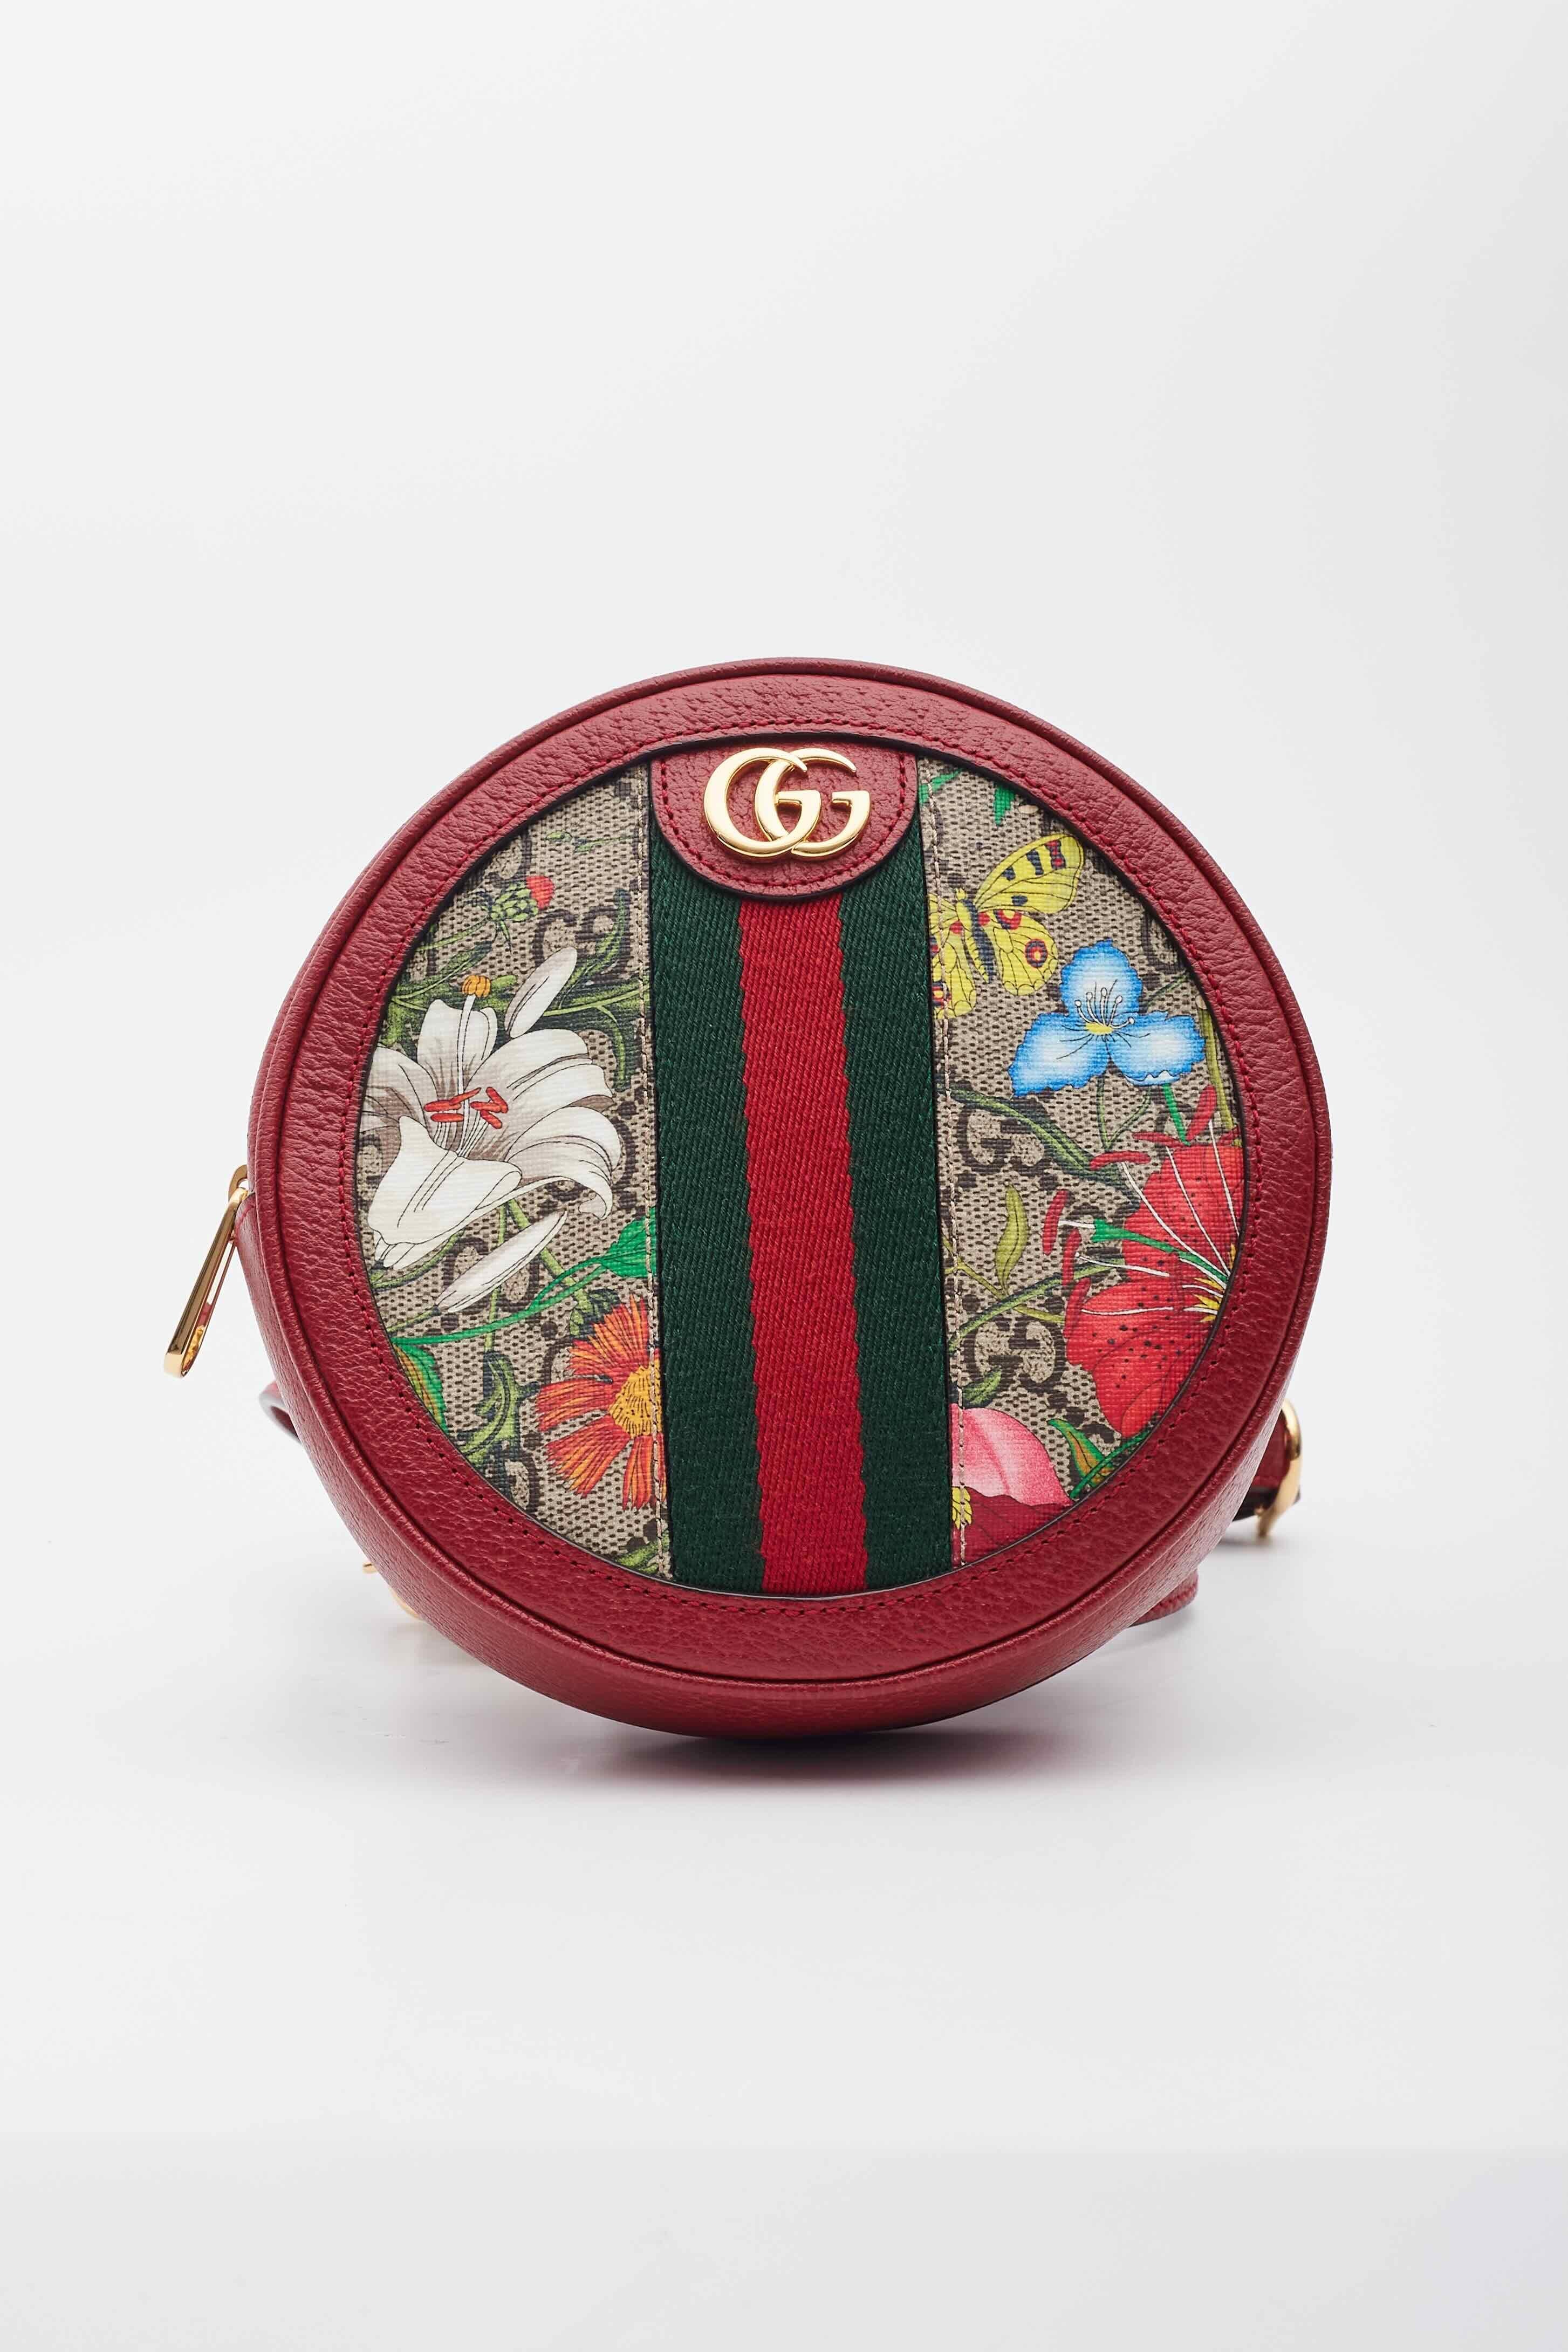 This Gucci mini Backpack features GG monogram Supreme coated canvas, a flora print overlay, gold tone Hardware and a round structure. The bag is finished with Web Accent detail on the front with Red Leather Trim Embellishment. The top zip closure